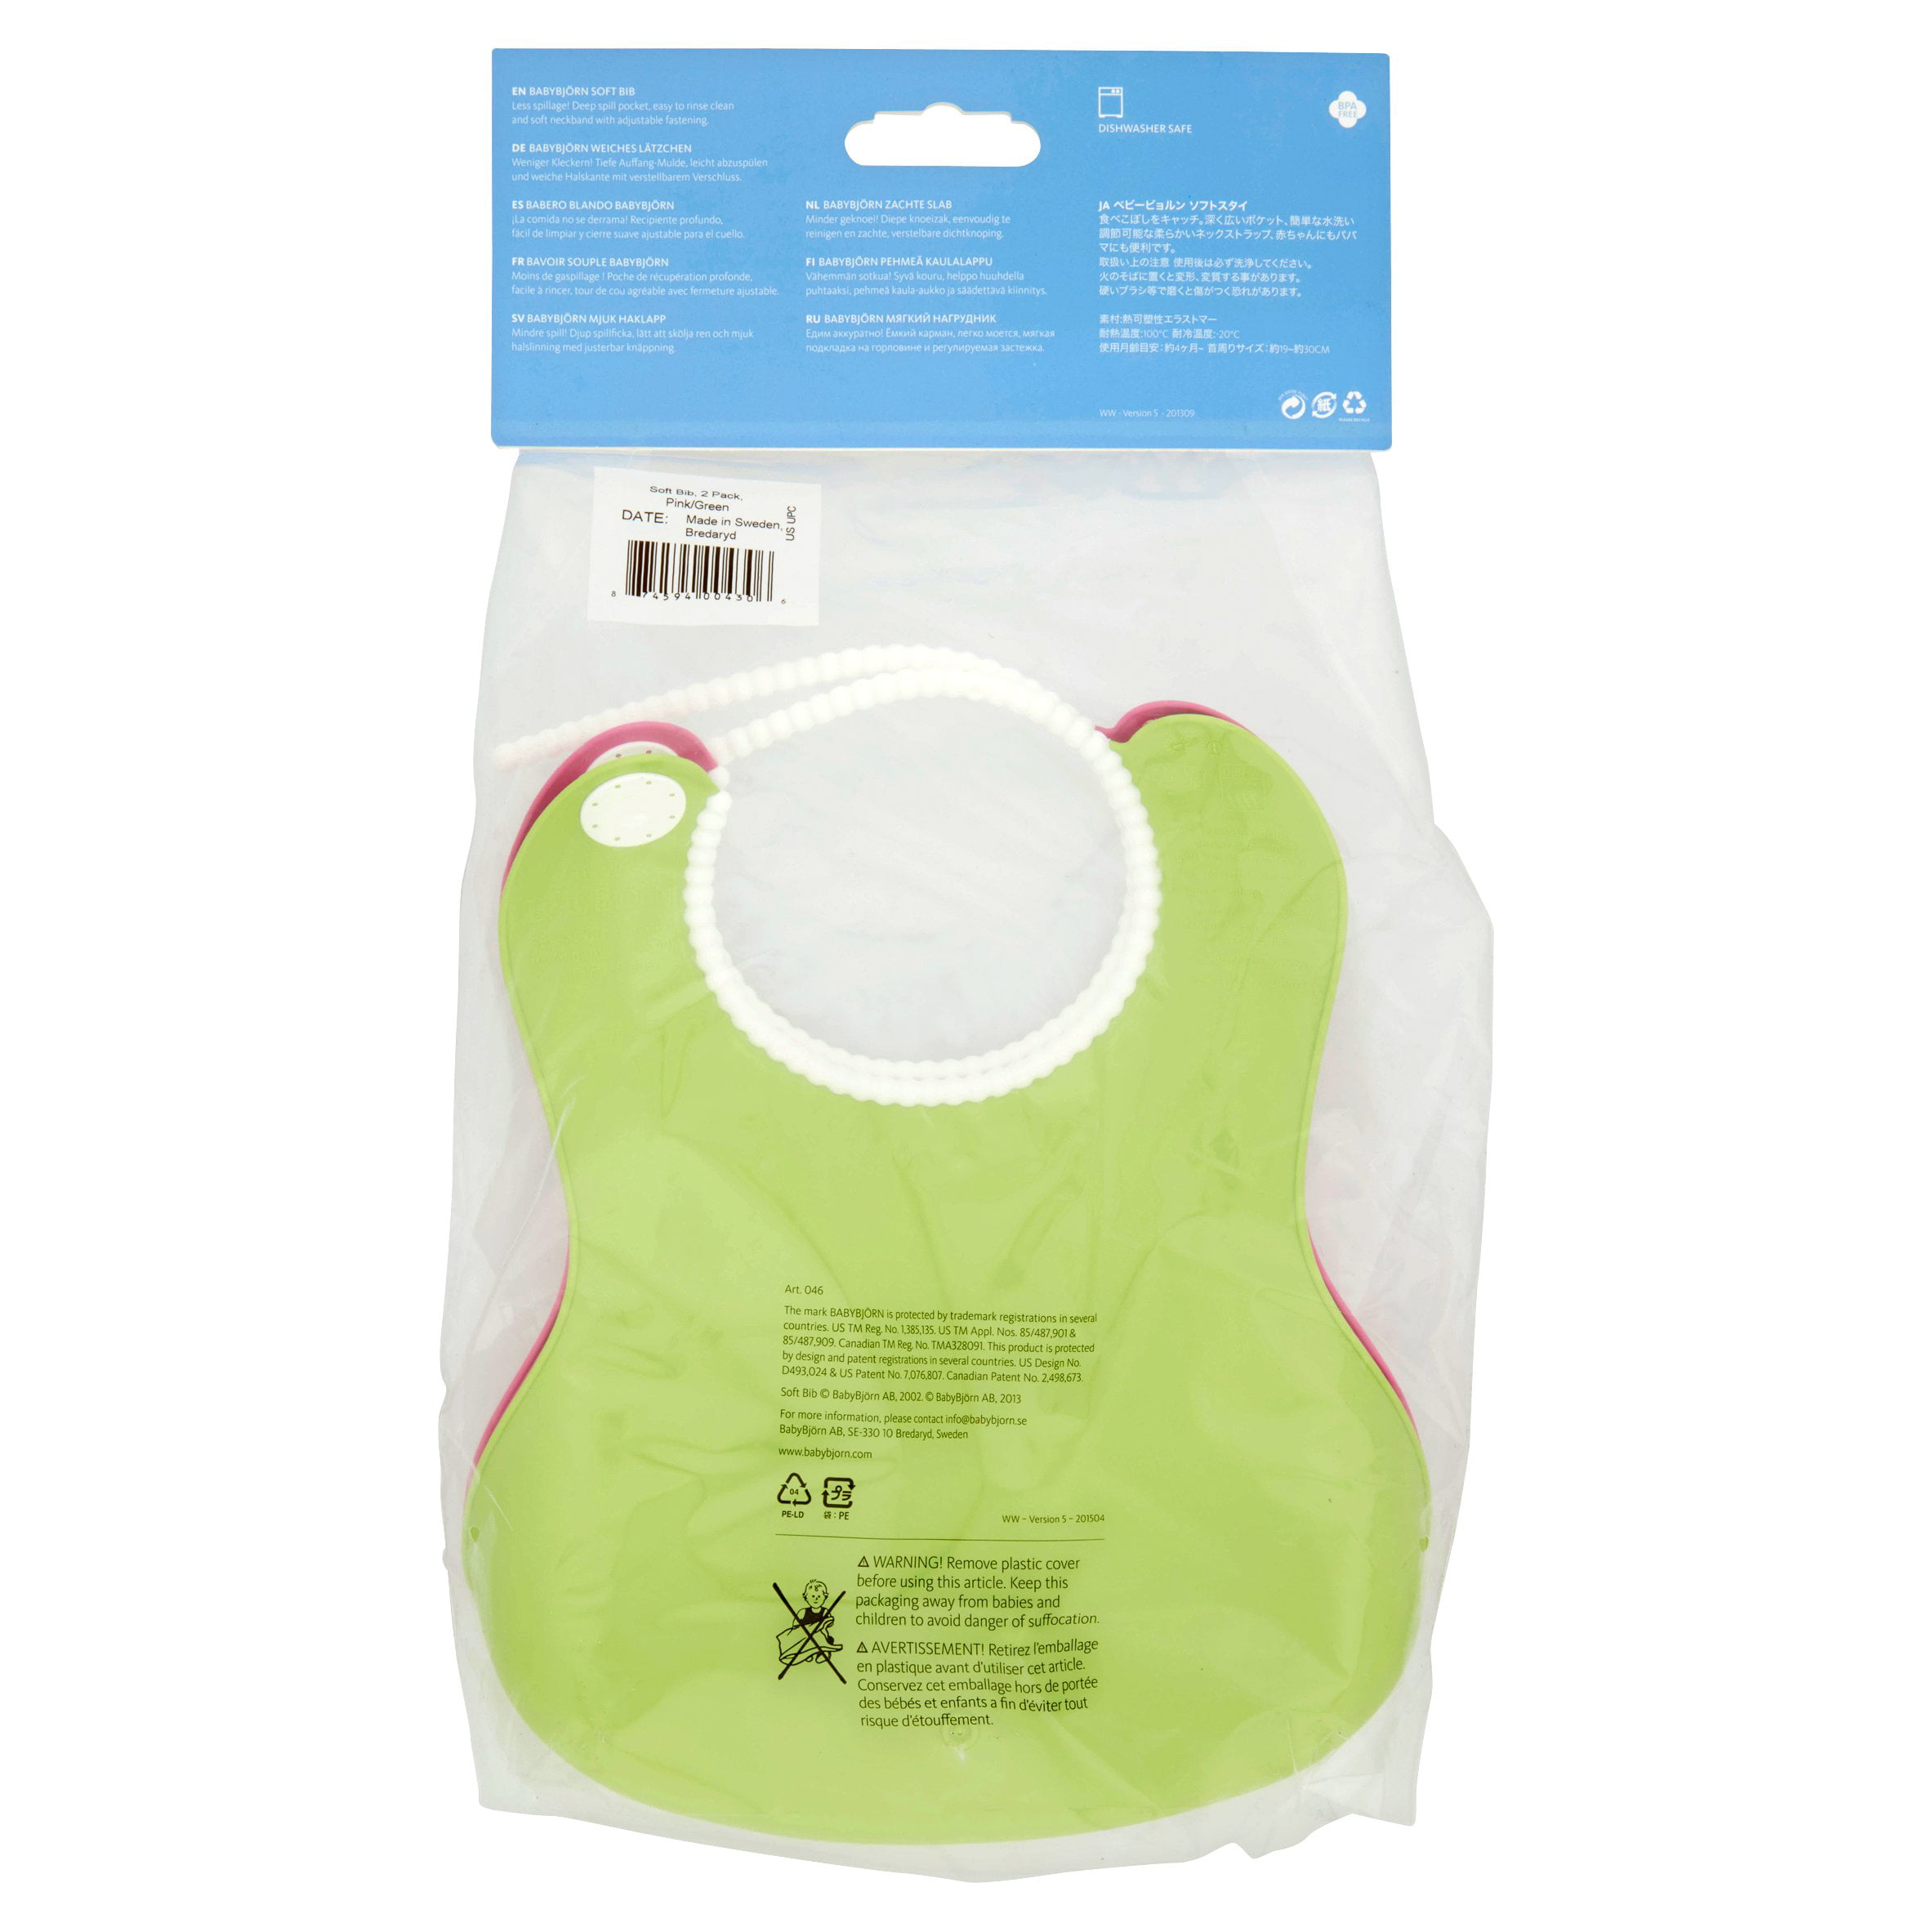 Lime Green//Turquoise 2 x Finger Toothbrush Boxed Waterproof Silicone Bib-Adjustable 2 x Silicone Bibs Easy to Clean with Babies or Toddlers 2 x Soft Spoon Set of 2